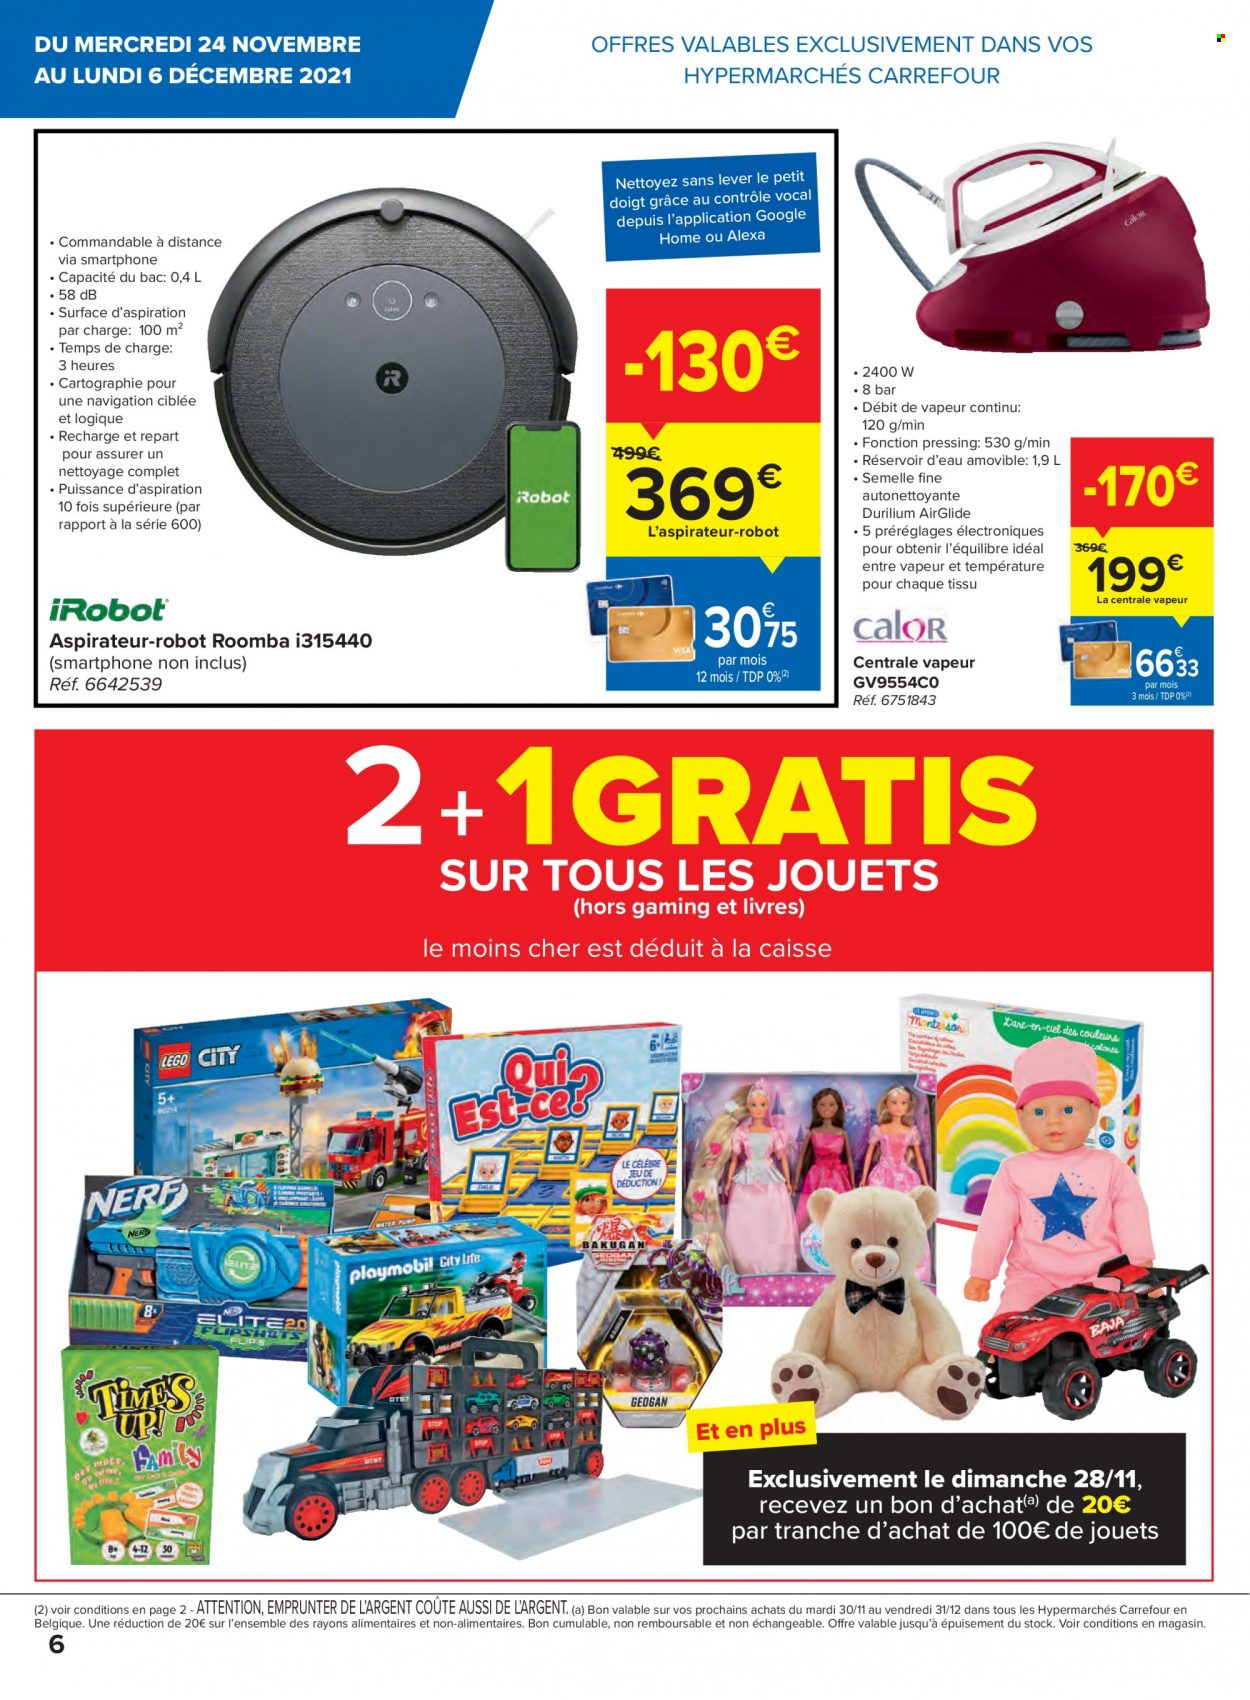 Catalogue Carrefour hypermarkt - 24.11.2021 - 6.12.2021. Page 6.